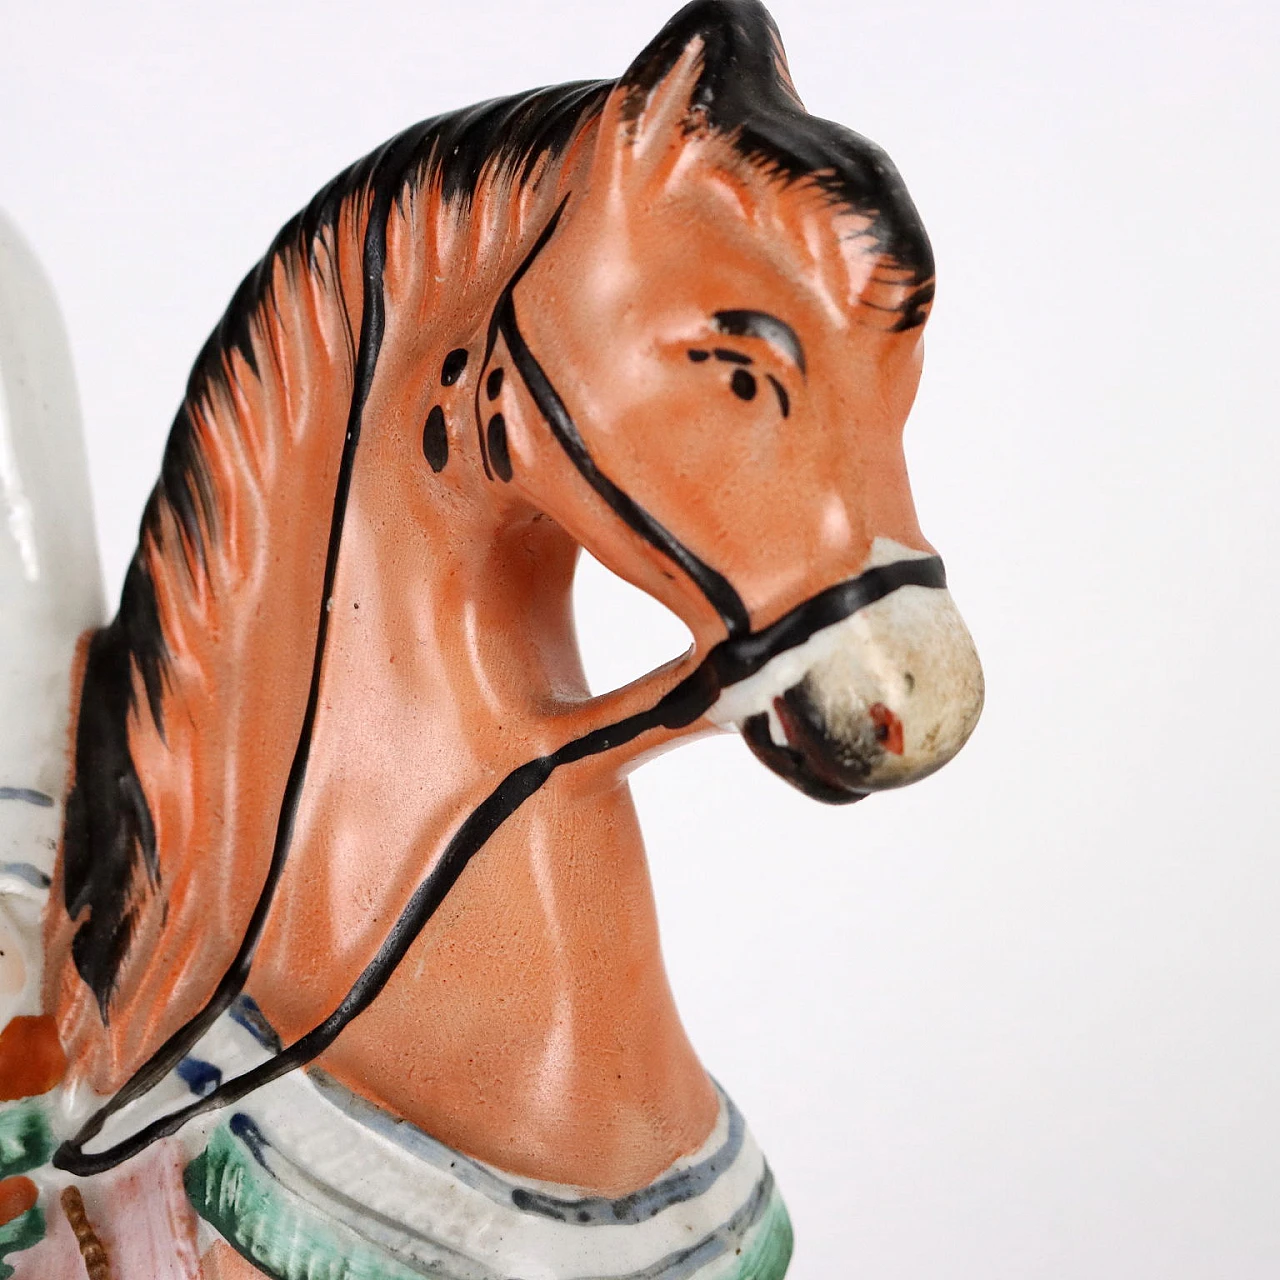 Prince of Wales on a horse in Staffordshire porcelain, 19th century 4